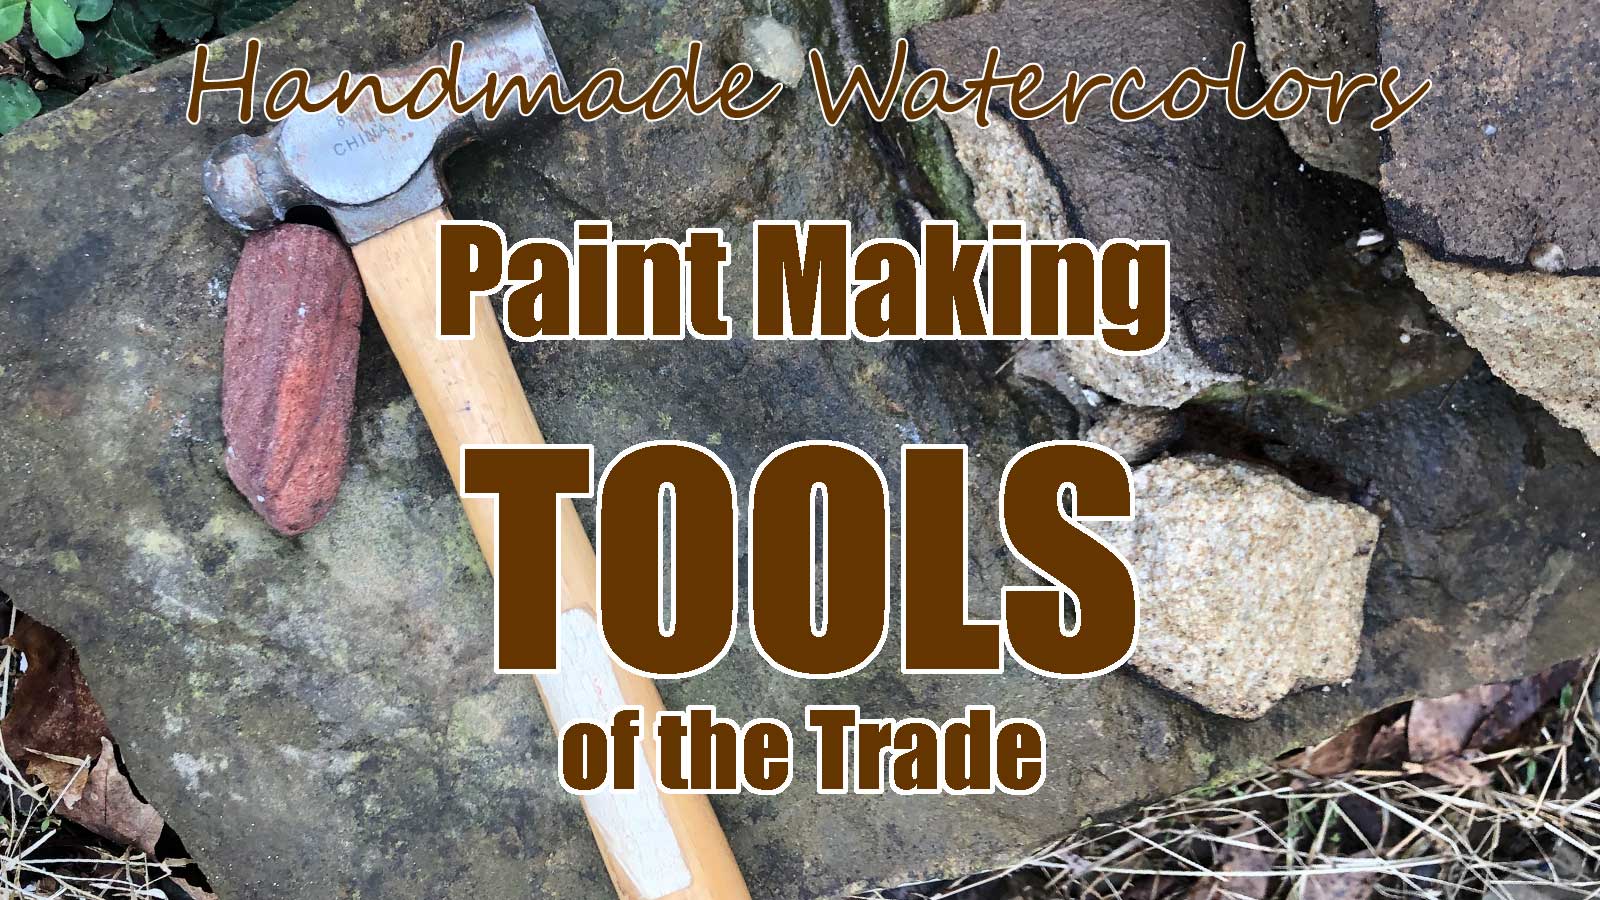 Paint Making Tools of the Trade